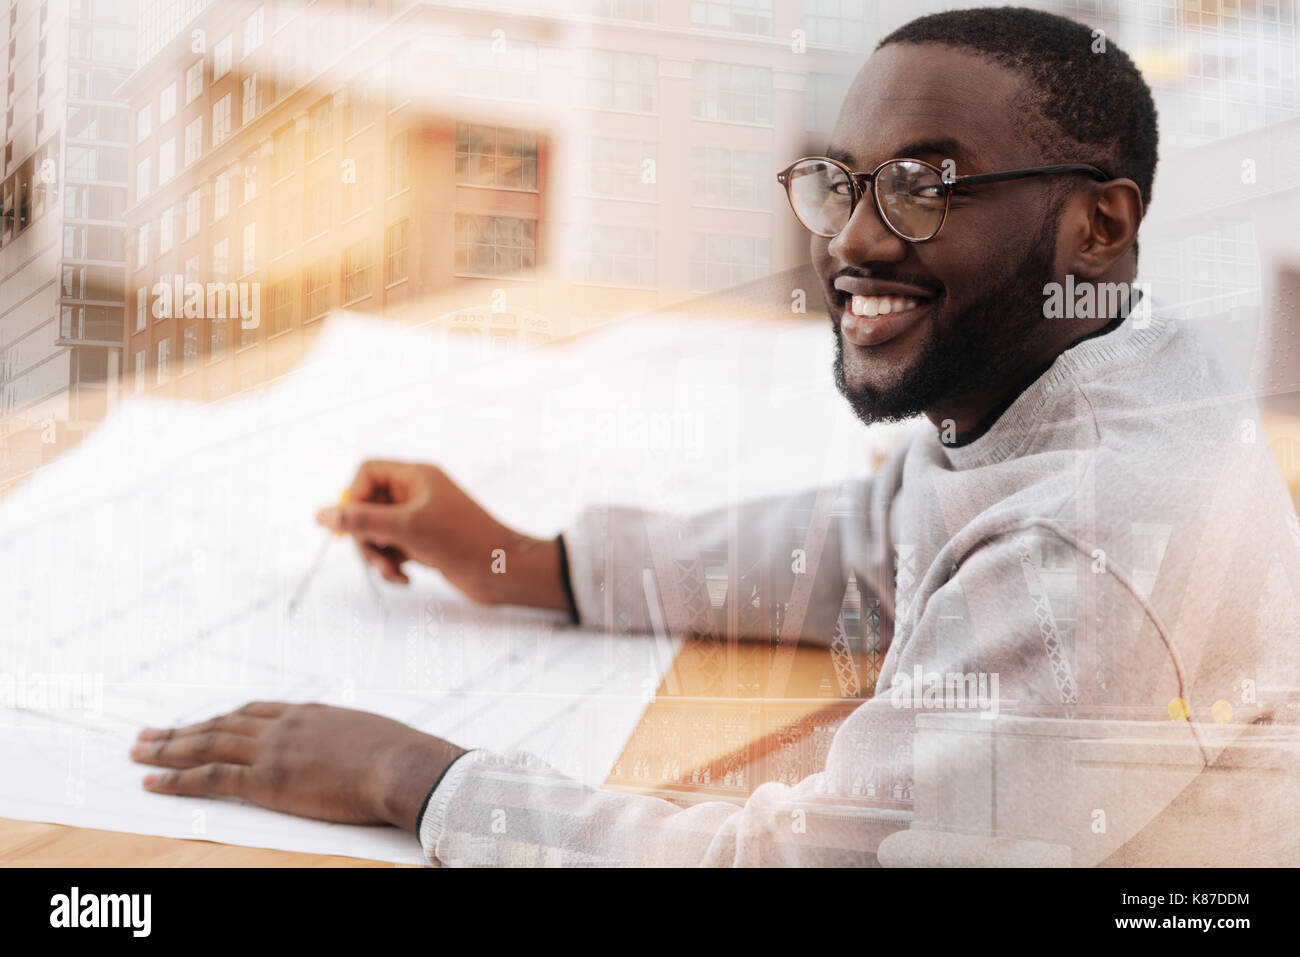 Smiling hardworking man sitting at the table Stock Photo